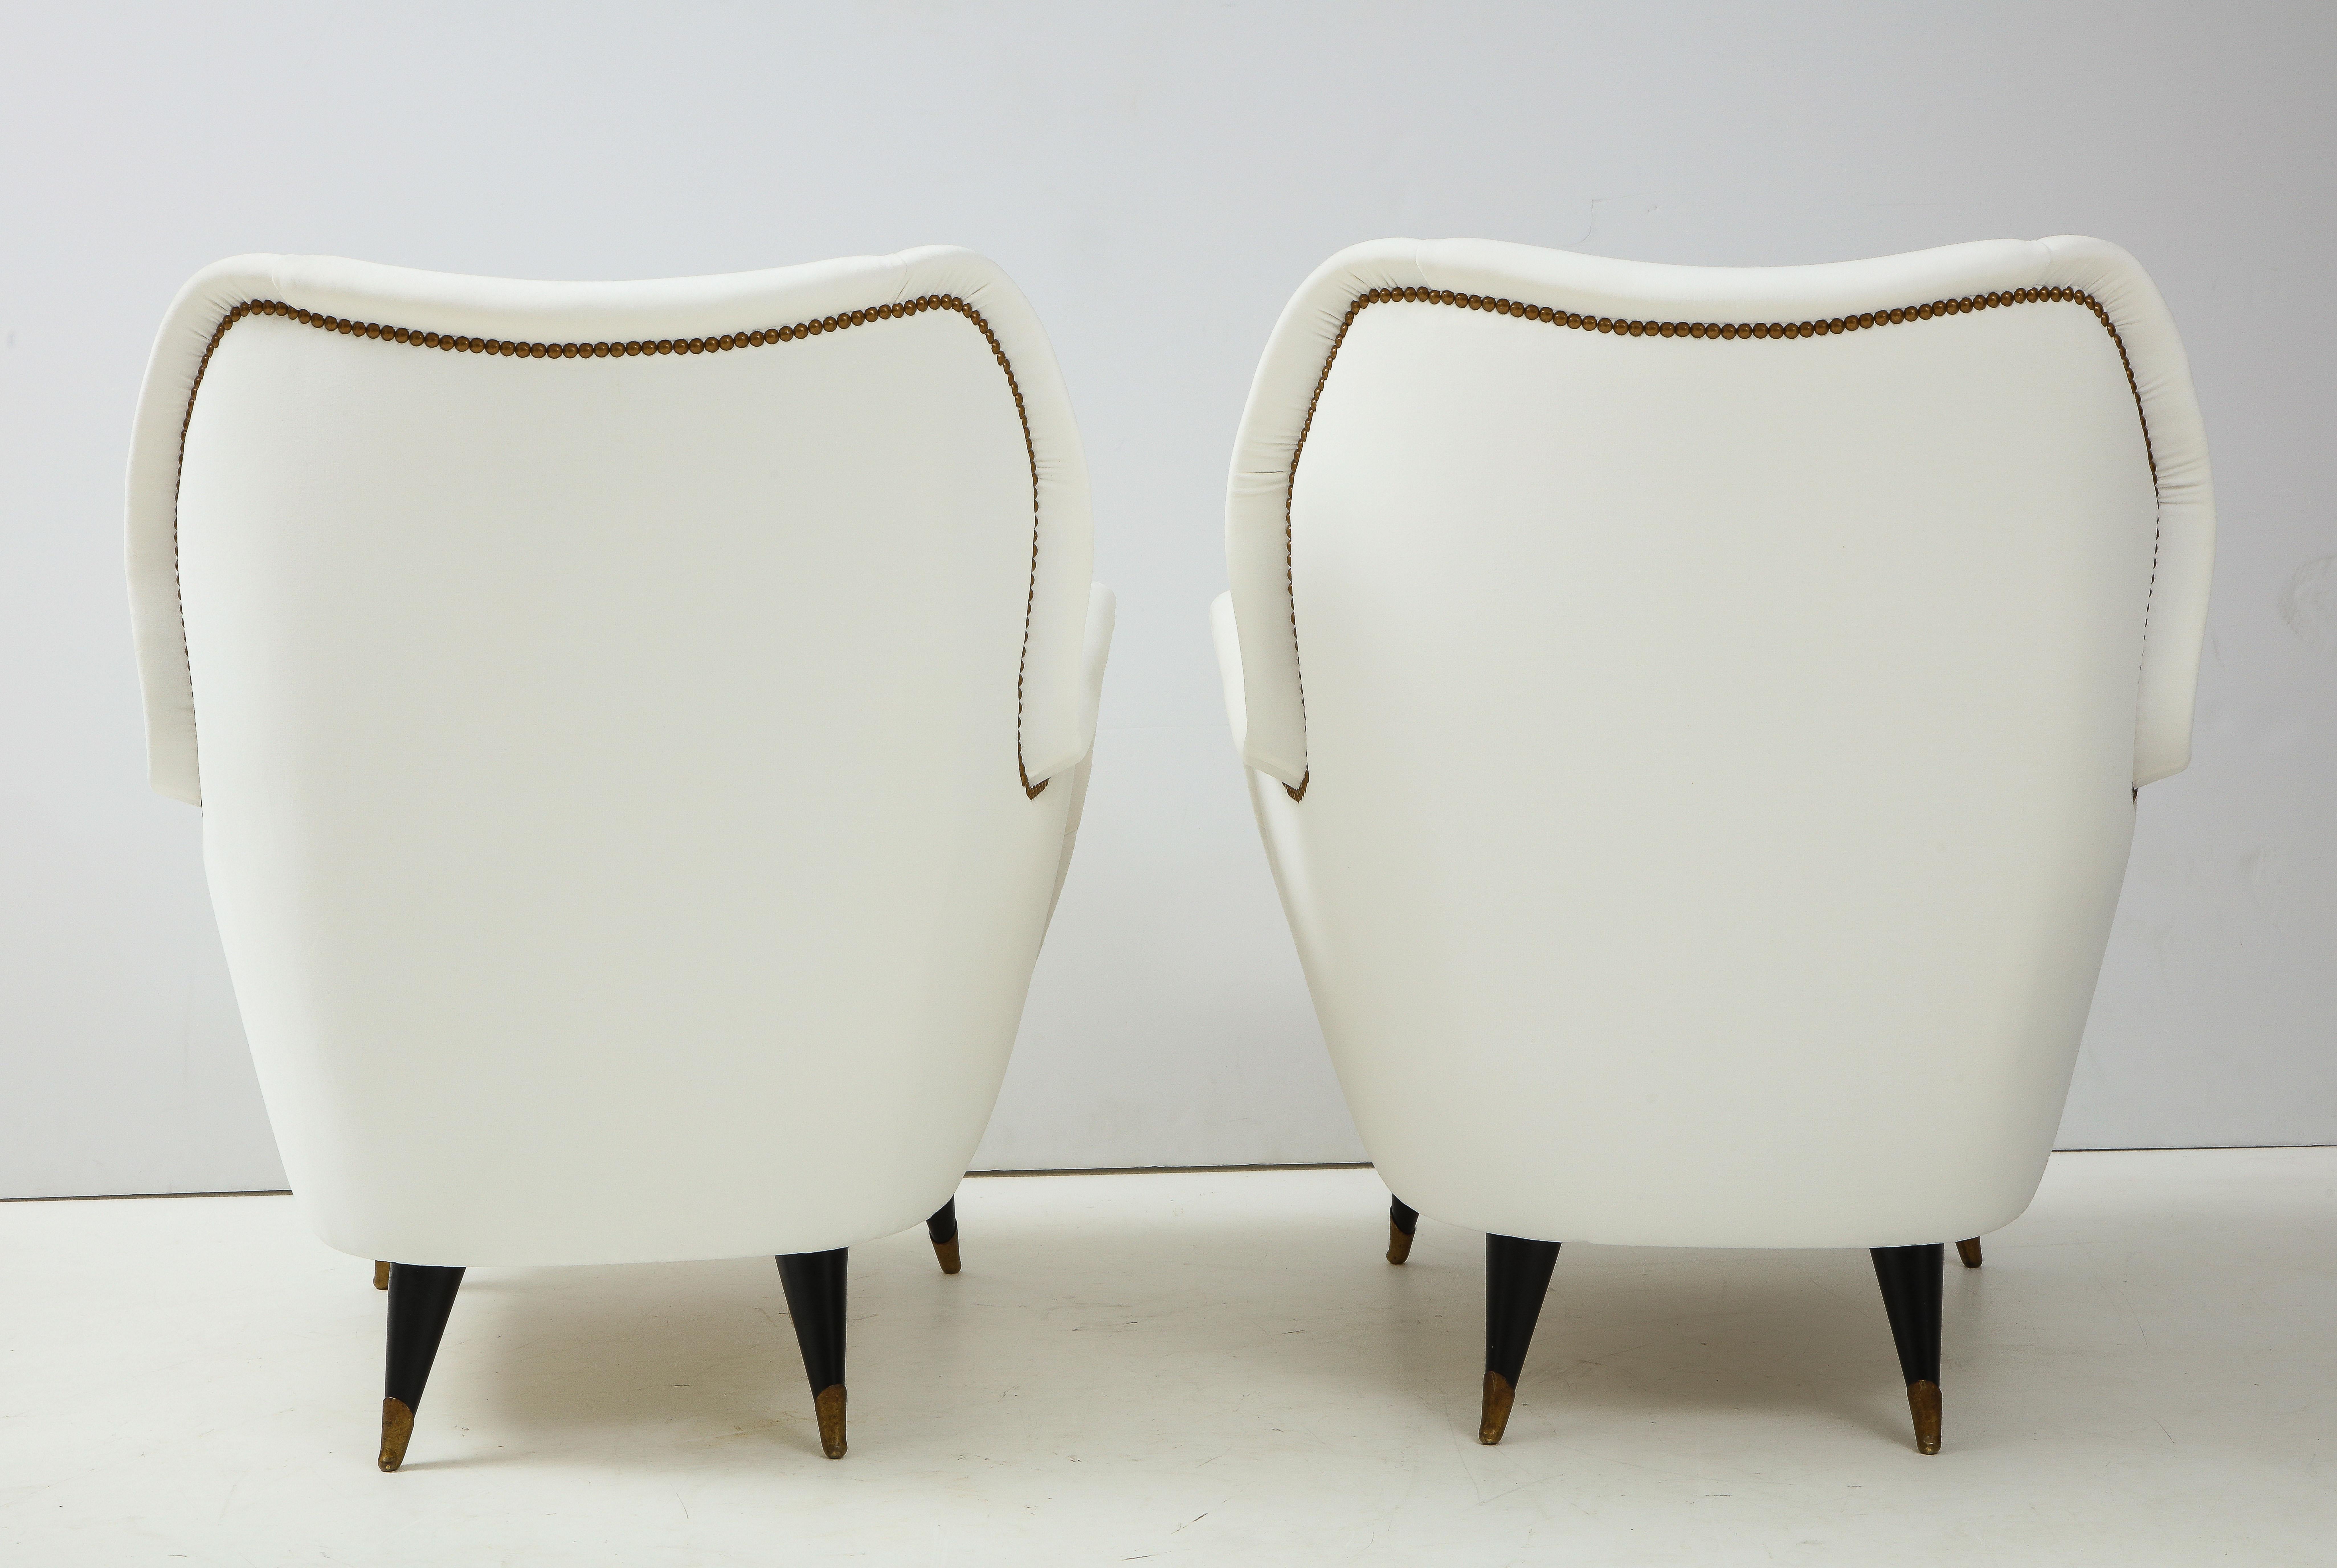 Brass Pair of Sculptural Italian Vintage Lounge Chairs, Attributed to Gio Ponti For Sale